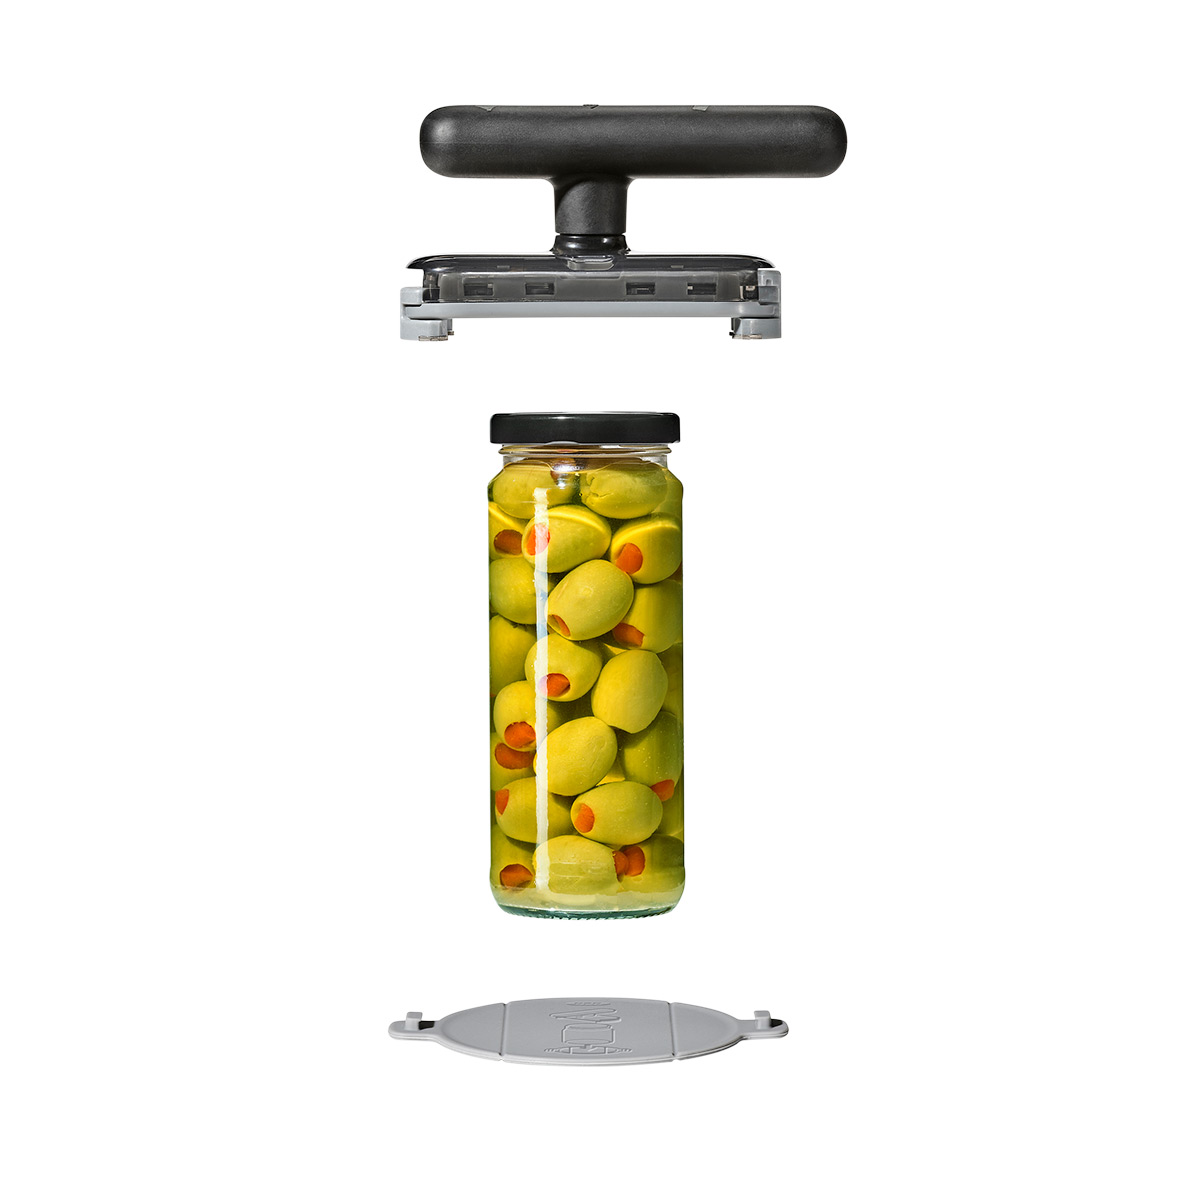 https://www.containerstore.com/catalogimages/481464/10091359-oxo-twisting-jar-opener-bas.jpg